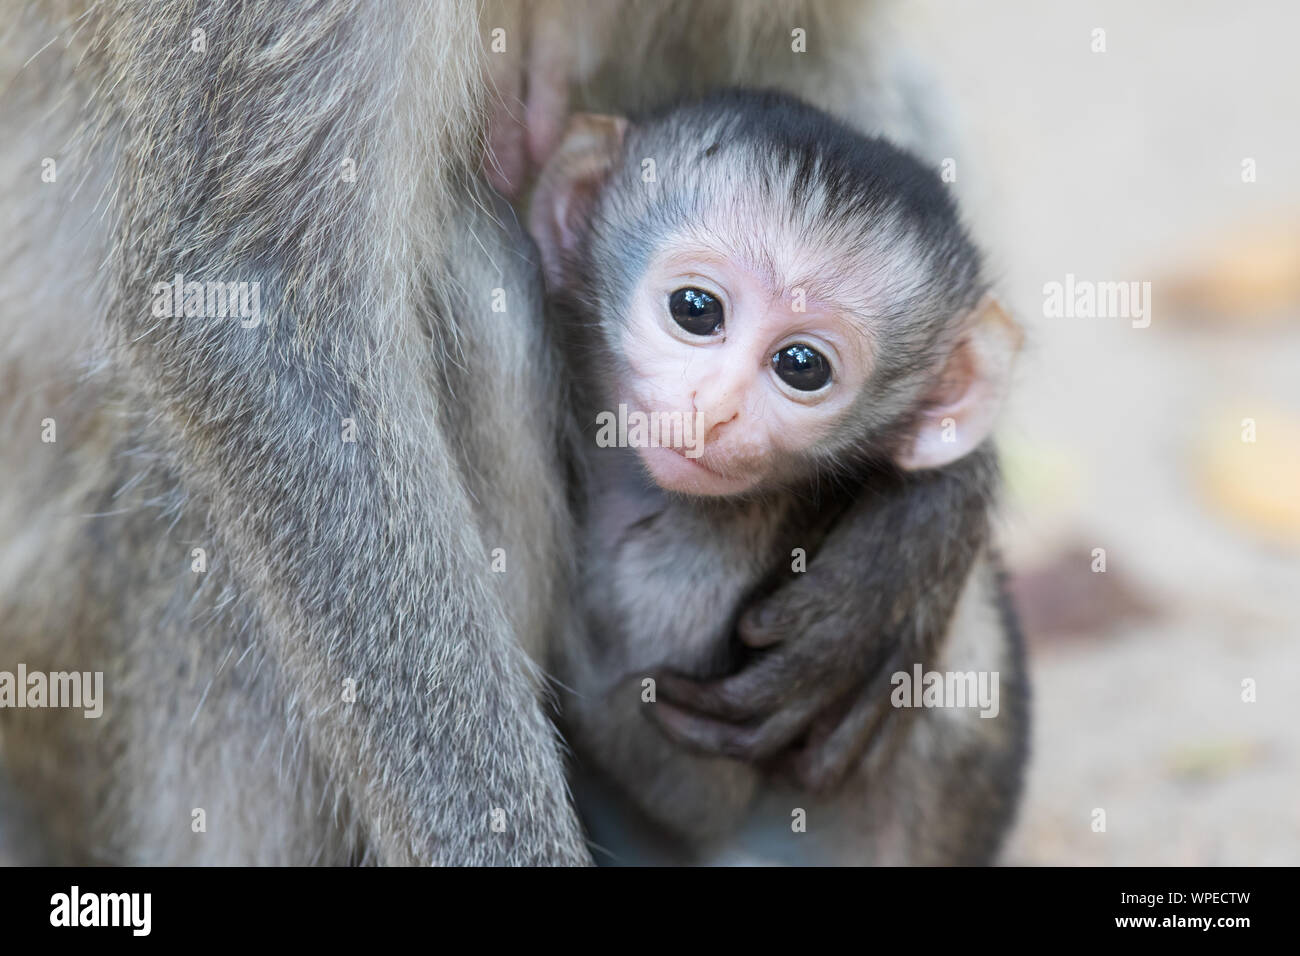 A newborn Baby Vervet Monkey in its mothers clutches Stock Photo